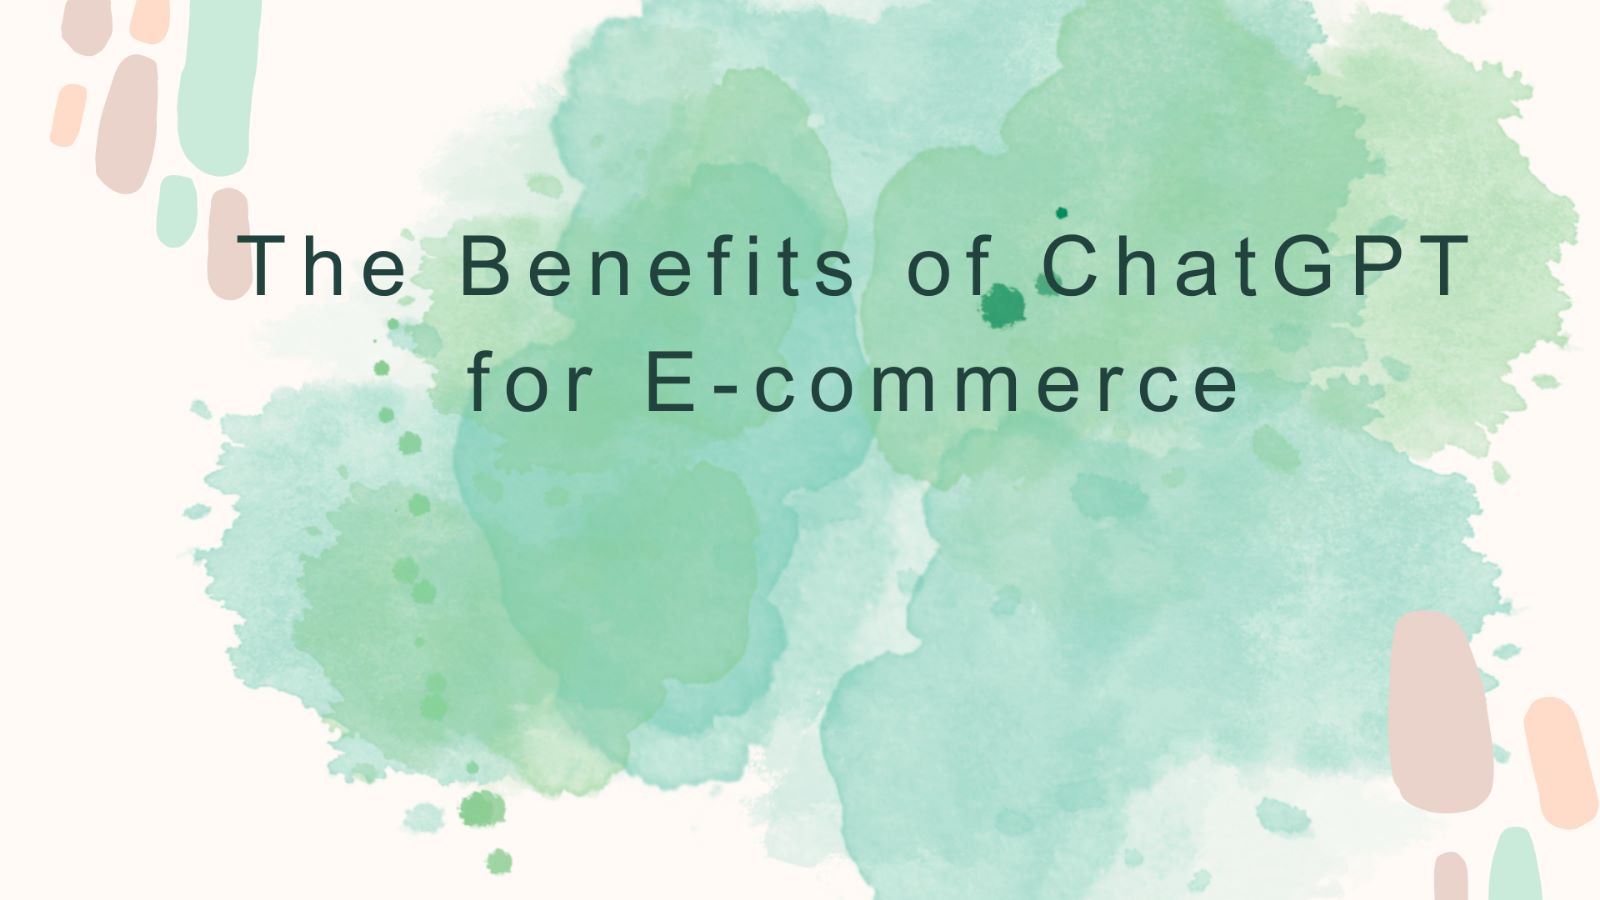 The Benefits of ChatGPT for E-commerce